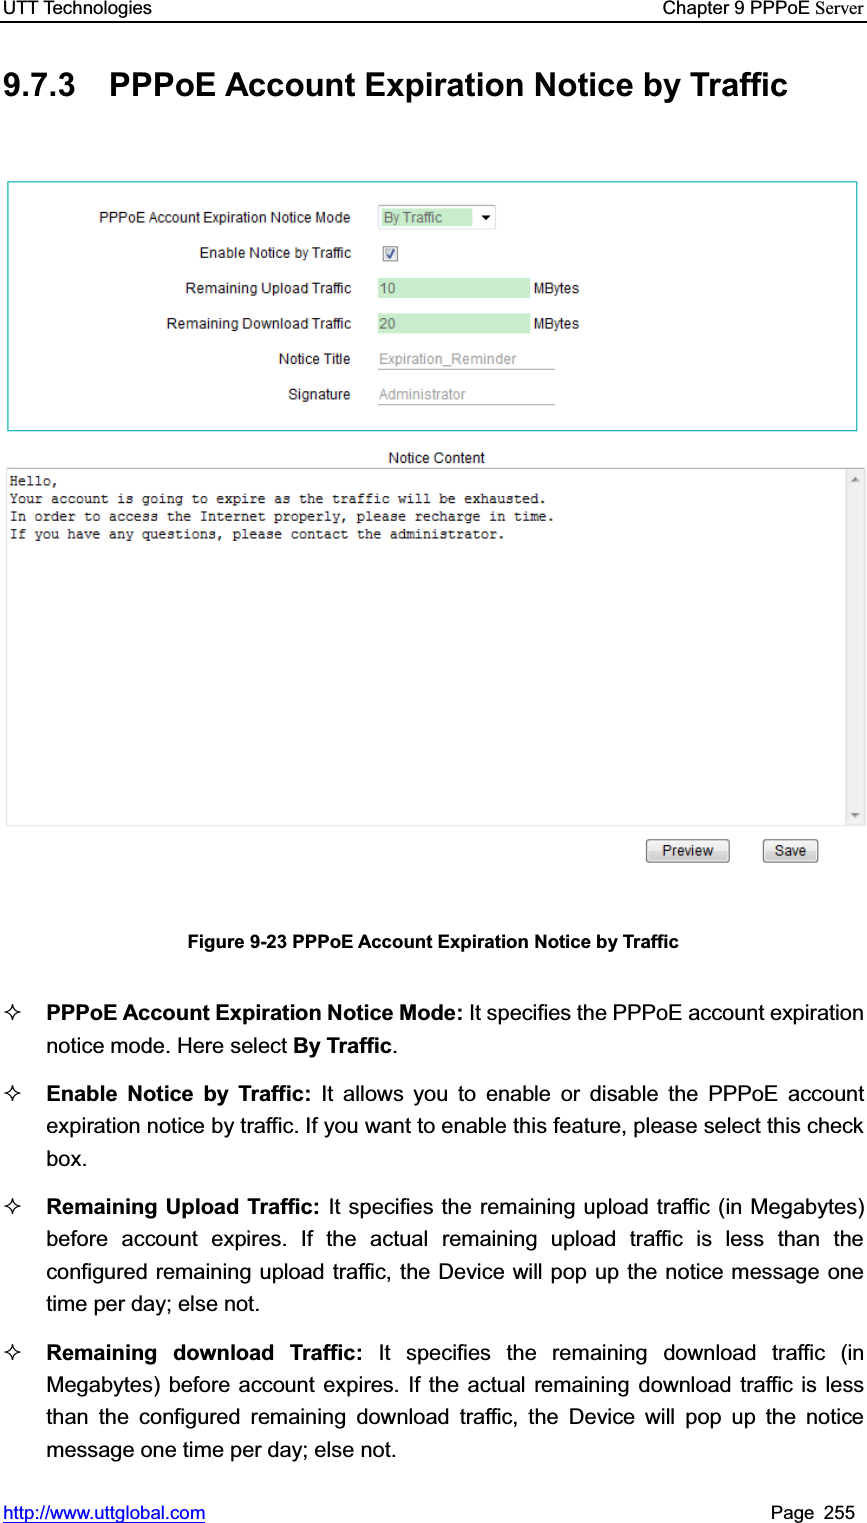 UTT Technologies    Chapter 9 PPPoE Serverhttp://www.uttglobal.com Page 255 9.7.3 PPPoE Account Expiration Notice by Traffic Figure 9-23 PPPoE Account Expiration Notice by Traffic PPPoE Account Expiration Notice Mode: It specifies the PPPoE account expiration notice mode. Here select By Traffic.Enable Notice by Traffic: It allows you to enable or disable the PPPoE account expiration notice by traffic. If you want to enable this feature, please select this check box. Remaining Upload Traffic: It specifies the remaining upload traffic (in Megabytes) before account expires. If the actual remaining upload traffic is less than the configured remaining upload traffic, the Device will pop up the notice message one time per day; else not.Remaining download Traffic: It specifies the remaining download traffic (in Megabytes) before account expires. If the actual remaining download traffic is less than the configured remaining download traffic, the Device will pop up the notice message one time per day; else not.